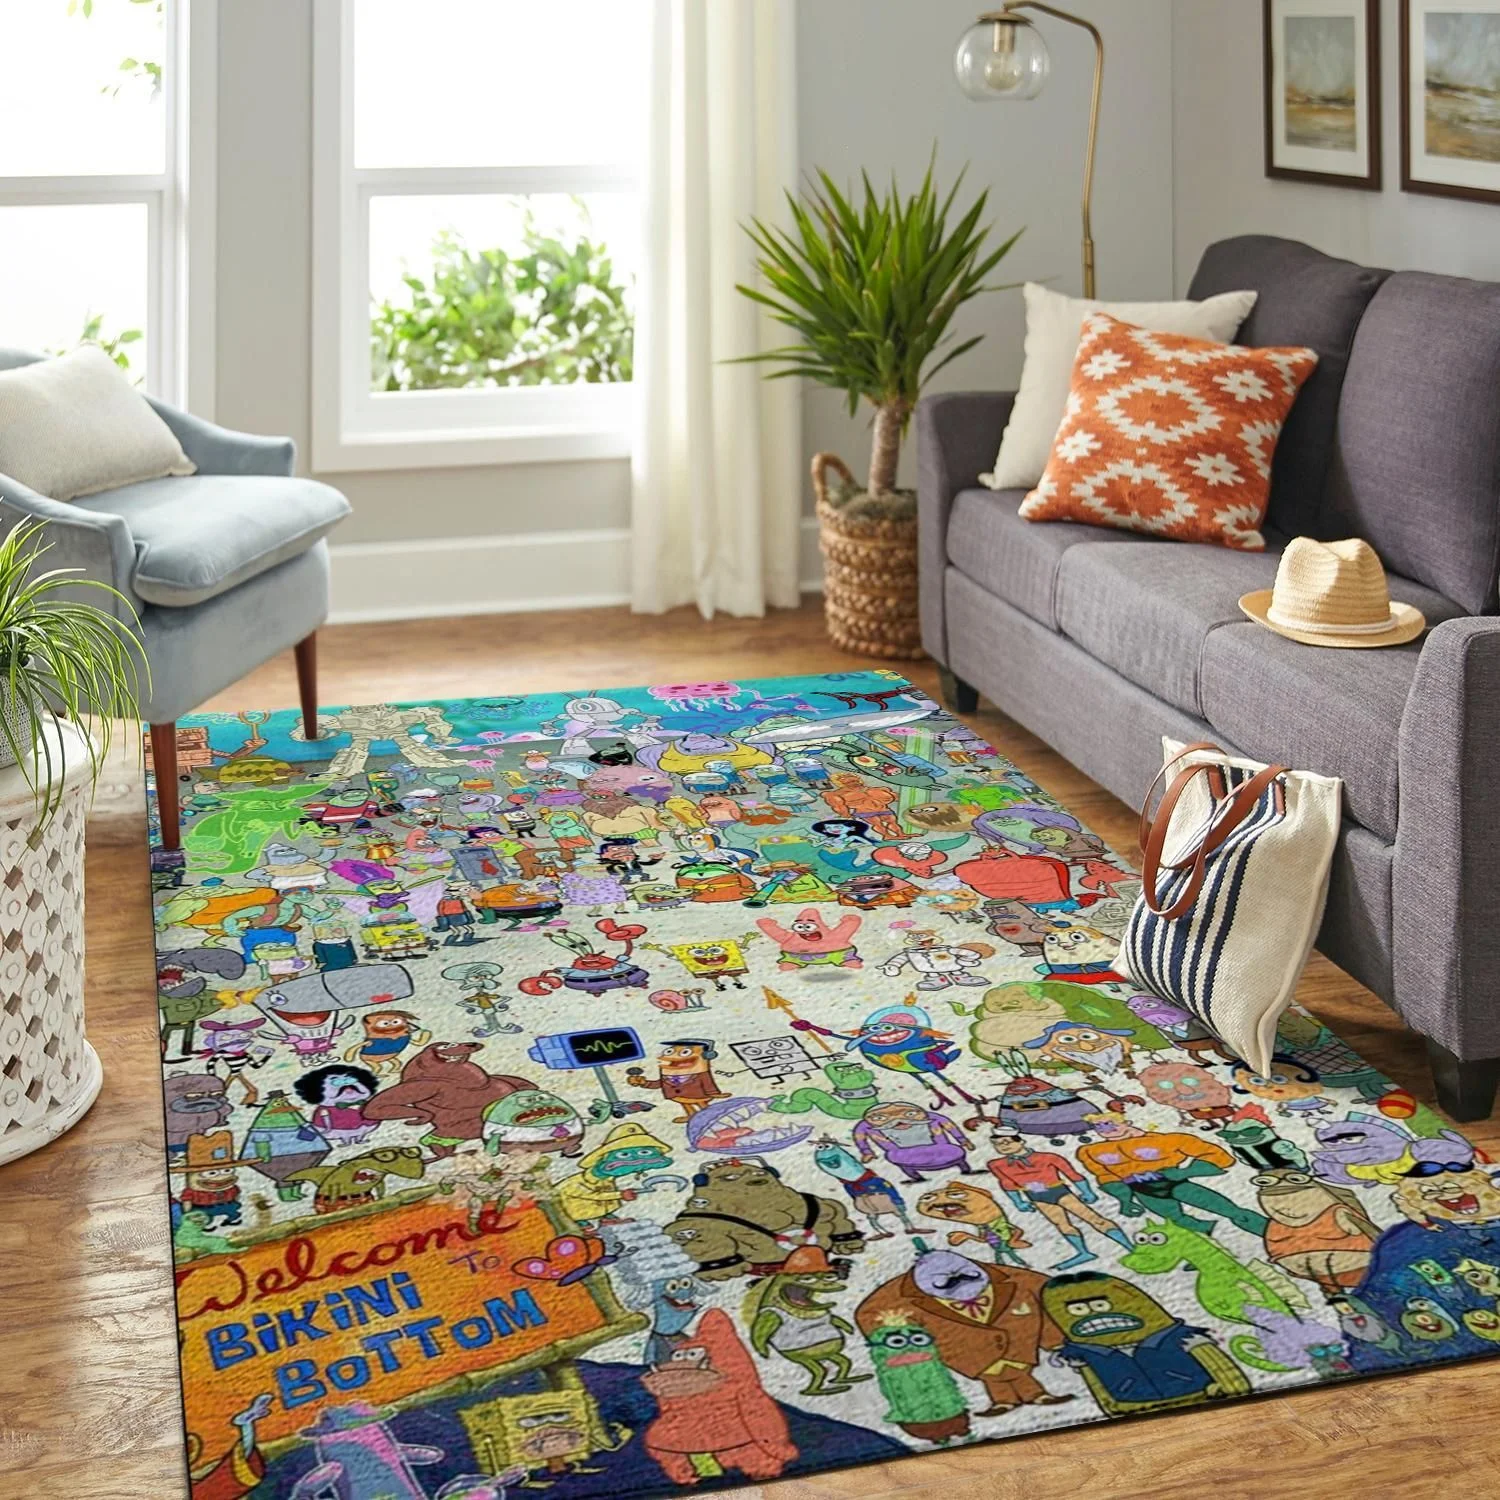 Spongebob Squarepants All Characters Kids Room Area Rug Rugs For Living Room Rug Home Decor - Indoor Outdoor Rugs